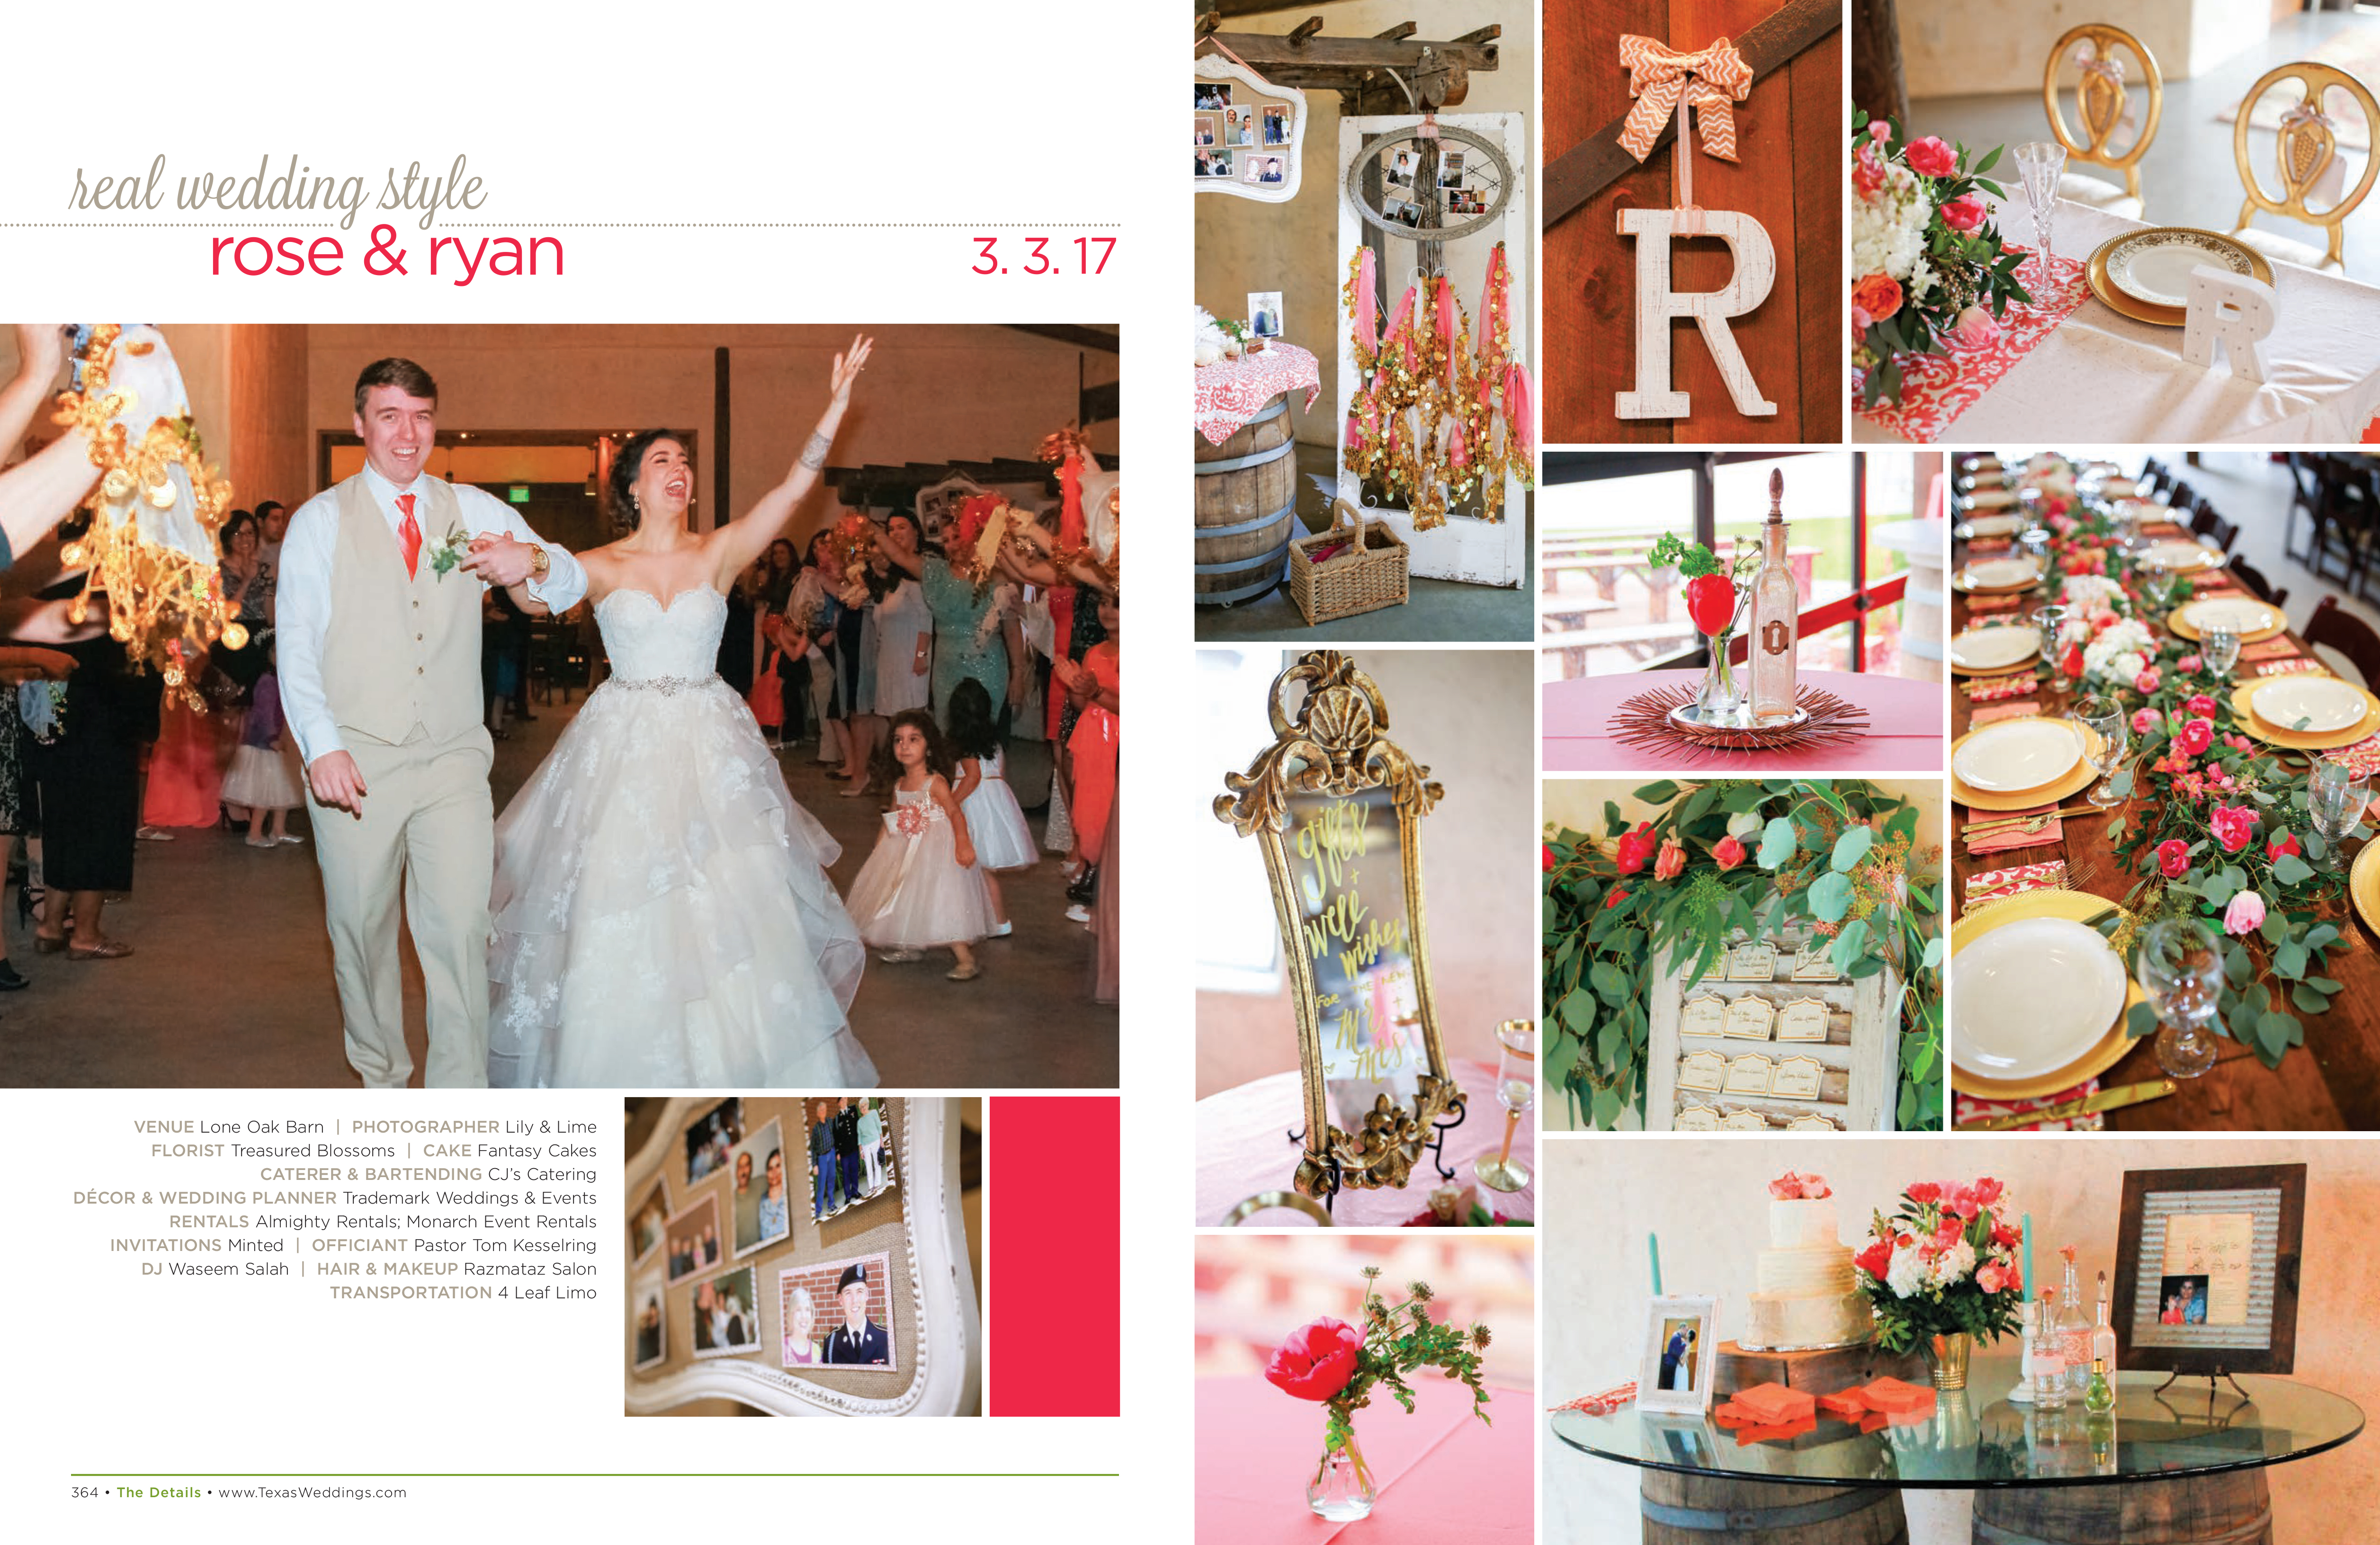 Rose & Ryan in their Real Wedding Page in the Spring/Summer 2018 Texas Wedding Guide